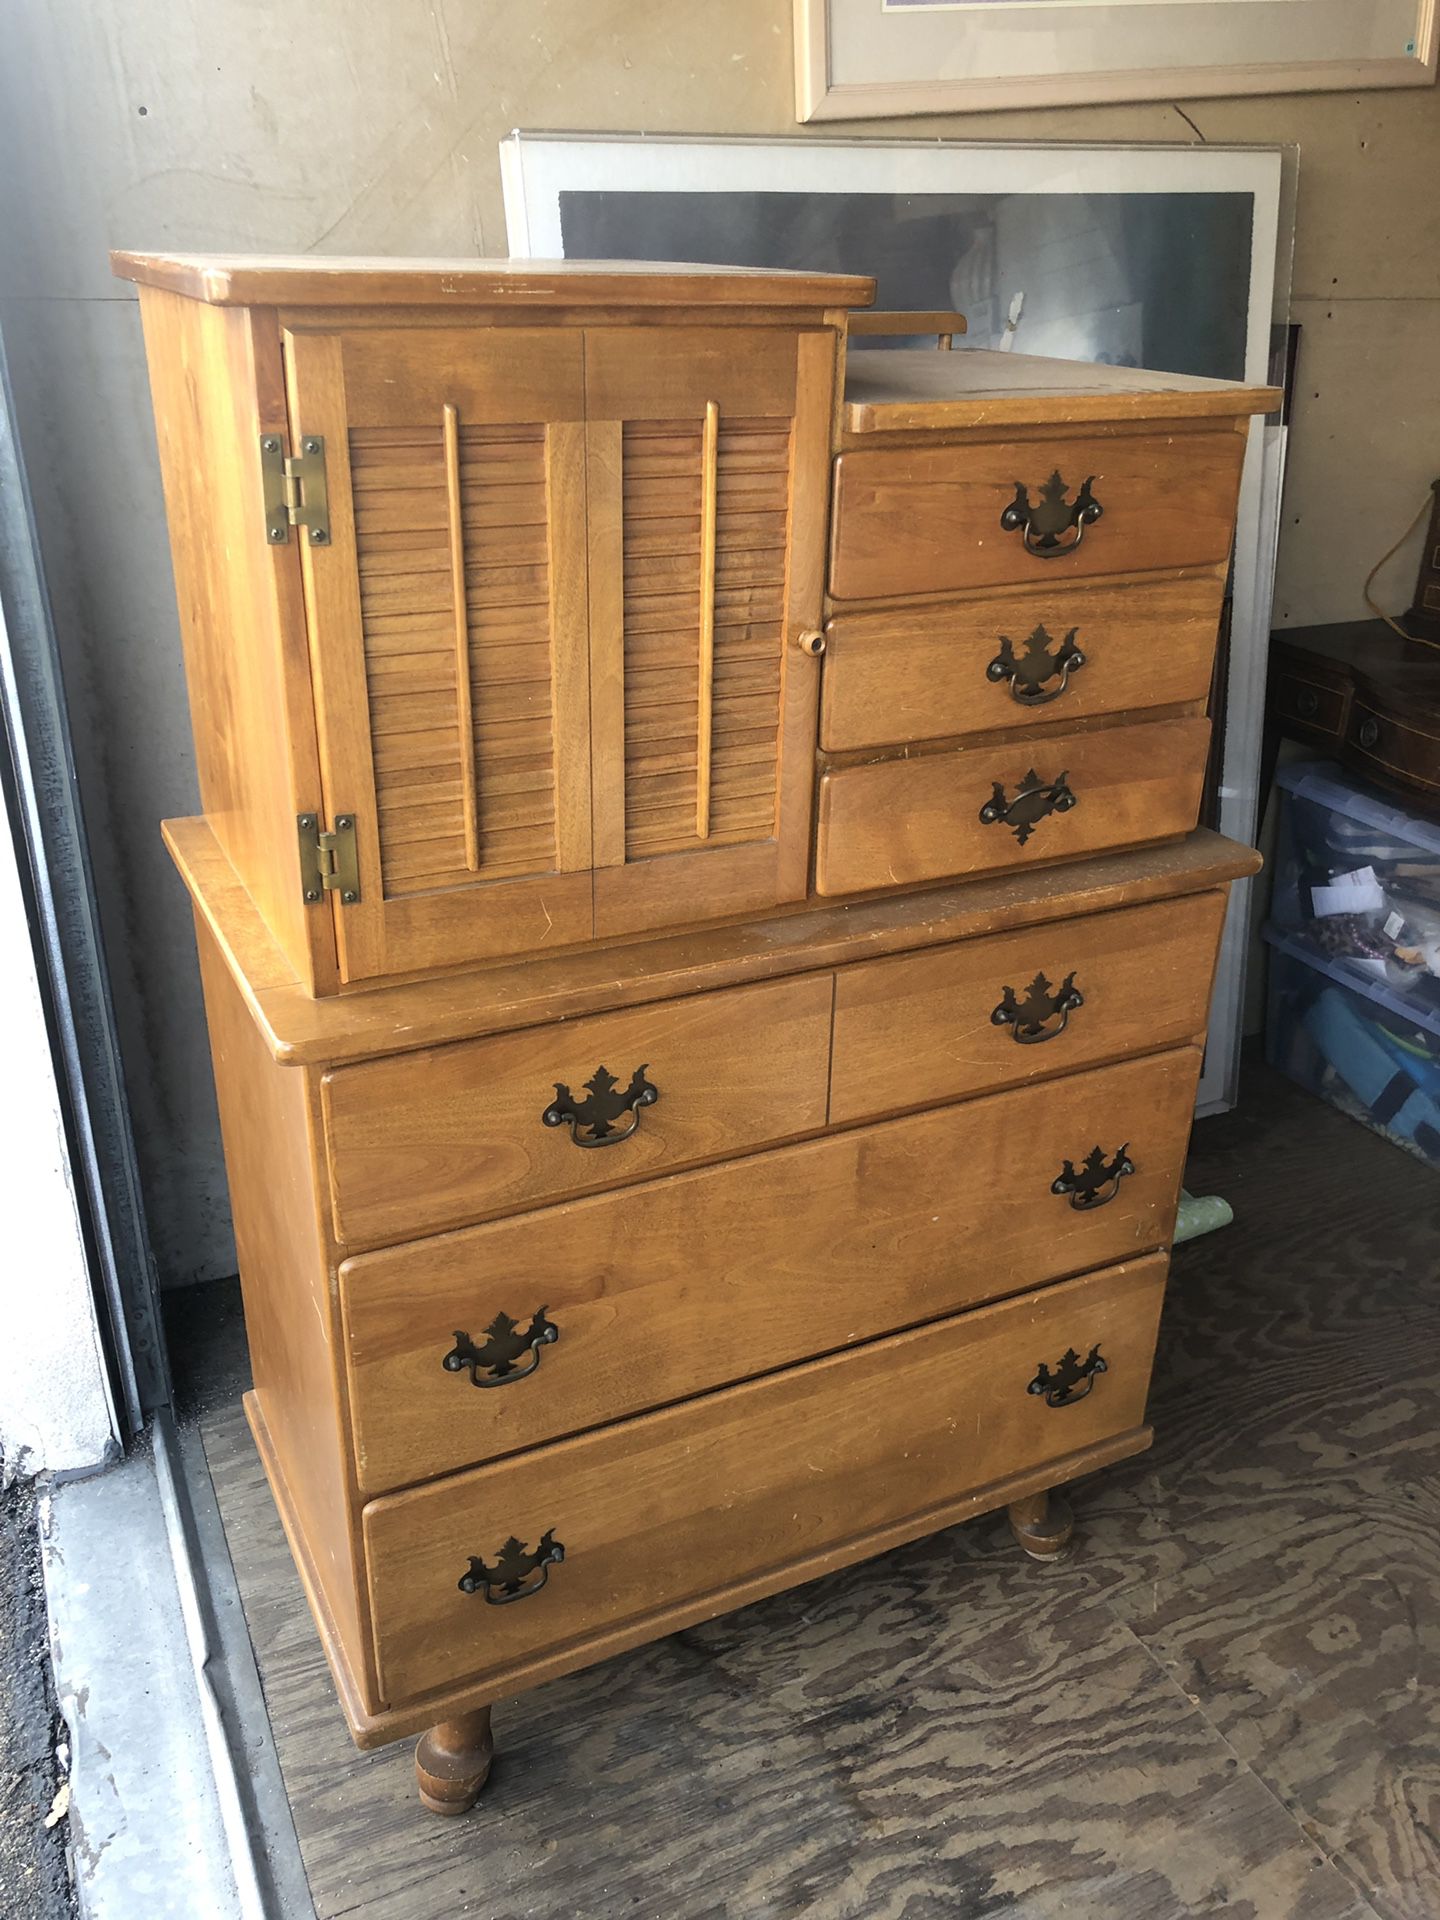 Reduced! Reduce...Dresser birch wood with 6 drawers two shelves